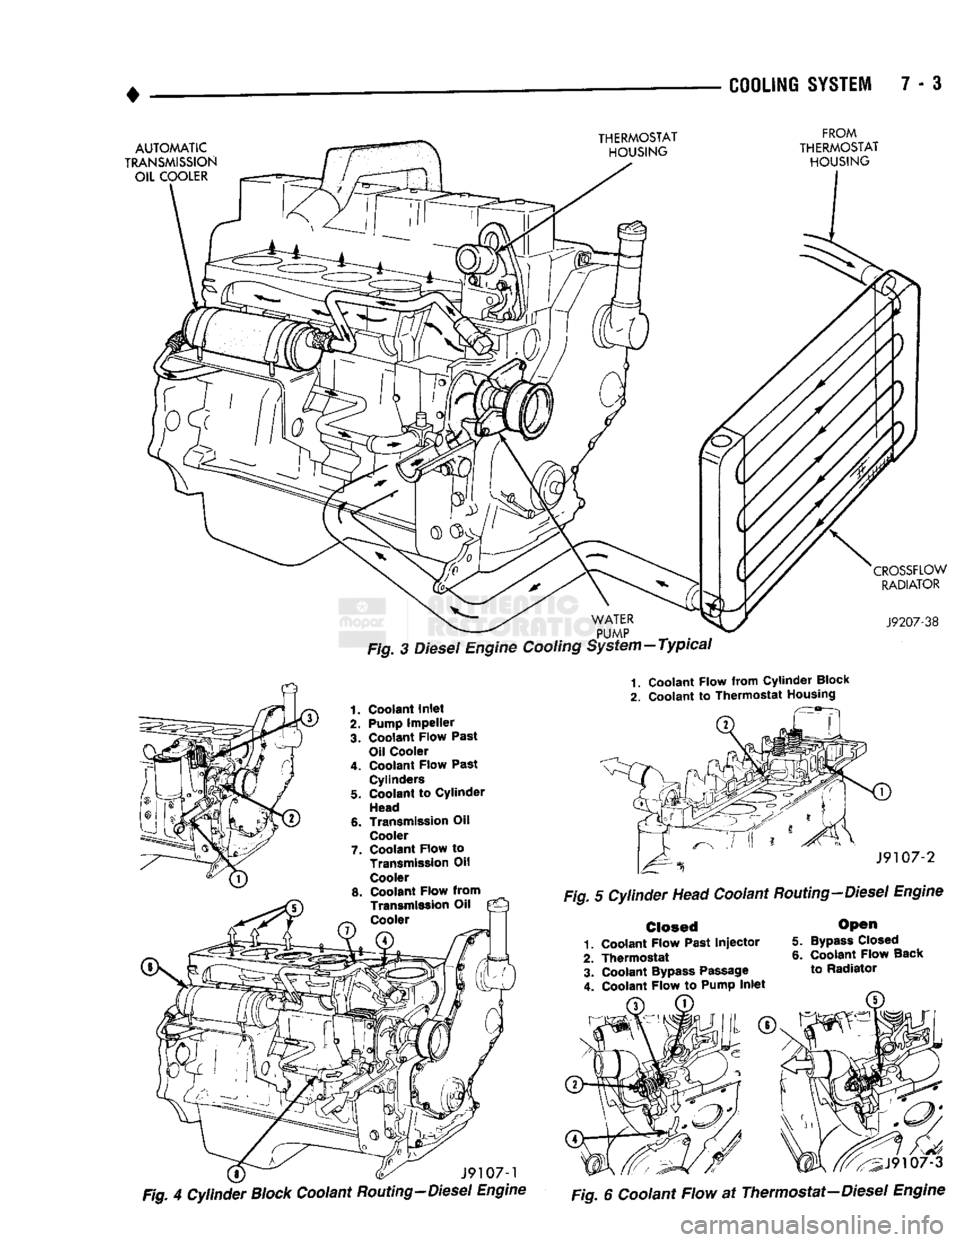 DODGE TRUCK 1993  Service Repair Manual 
•  COOLING
 SYSTEM
 7 - 3 
Fig. 3 Diesel Engine Cooling System-Typical 

1.
 Coolant
 Flow from Cylinder
 Block 

2.
 Coolant
 to Thermostat
 Housing 

Fig. 4
 Cylinder
 Block
 Coolant
 Routing-Die